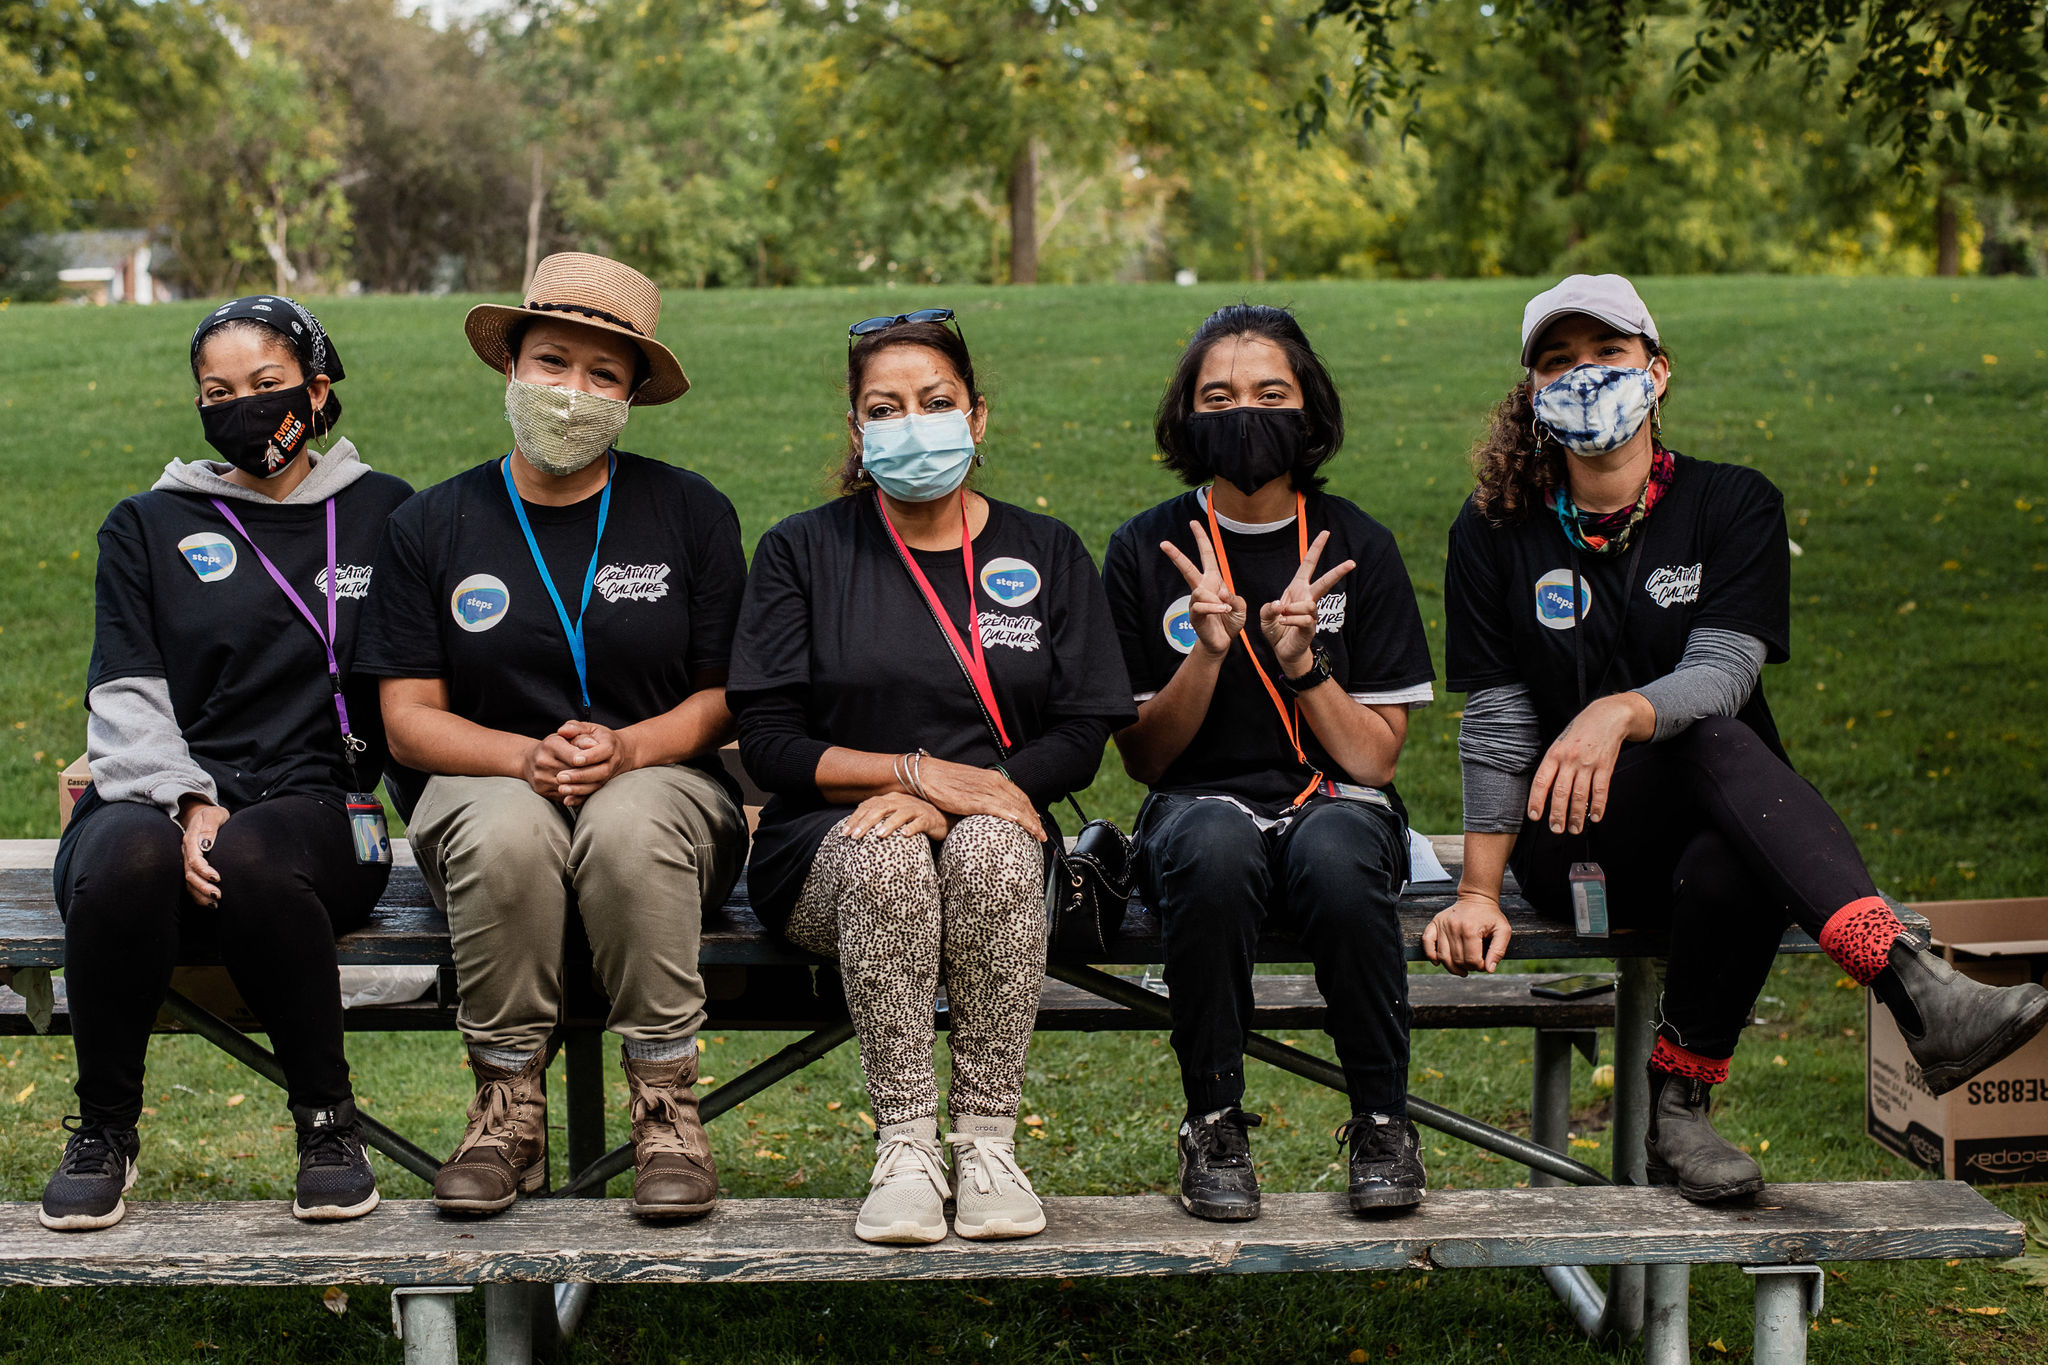 A group of people in black shirts sit on a bench and look directly at the camera. They are wearing face masks.